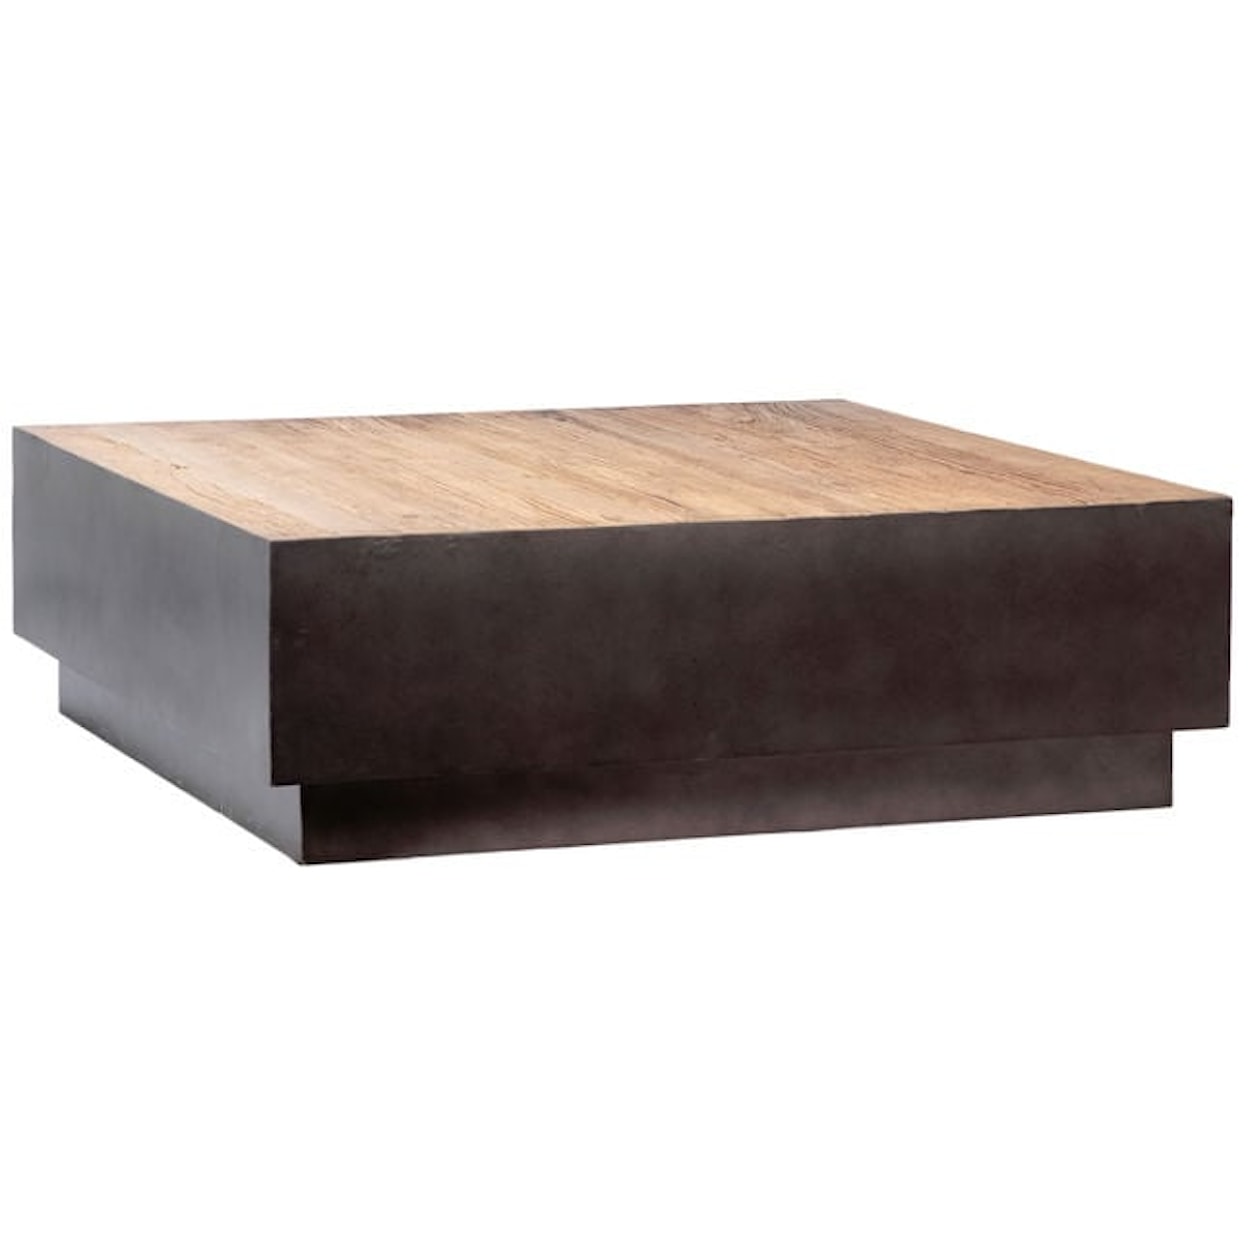 Dovetail Furniture Coffee Tables MATTEO COFFEE TABLE